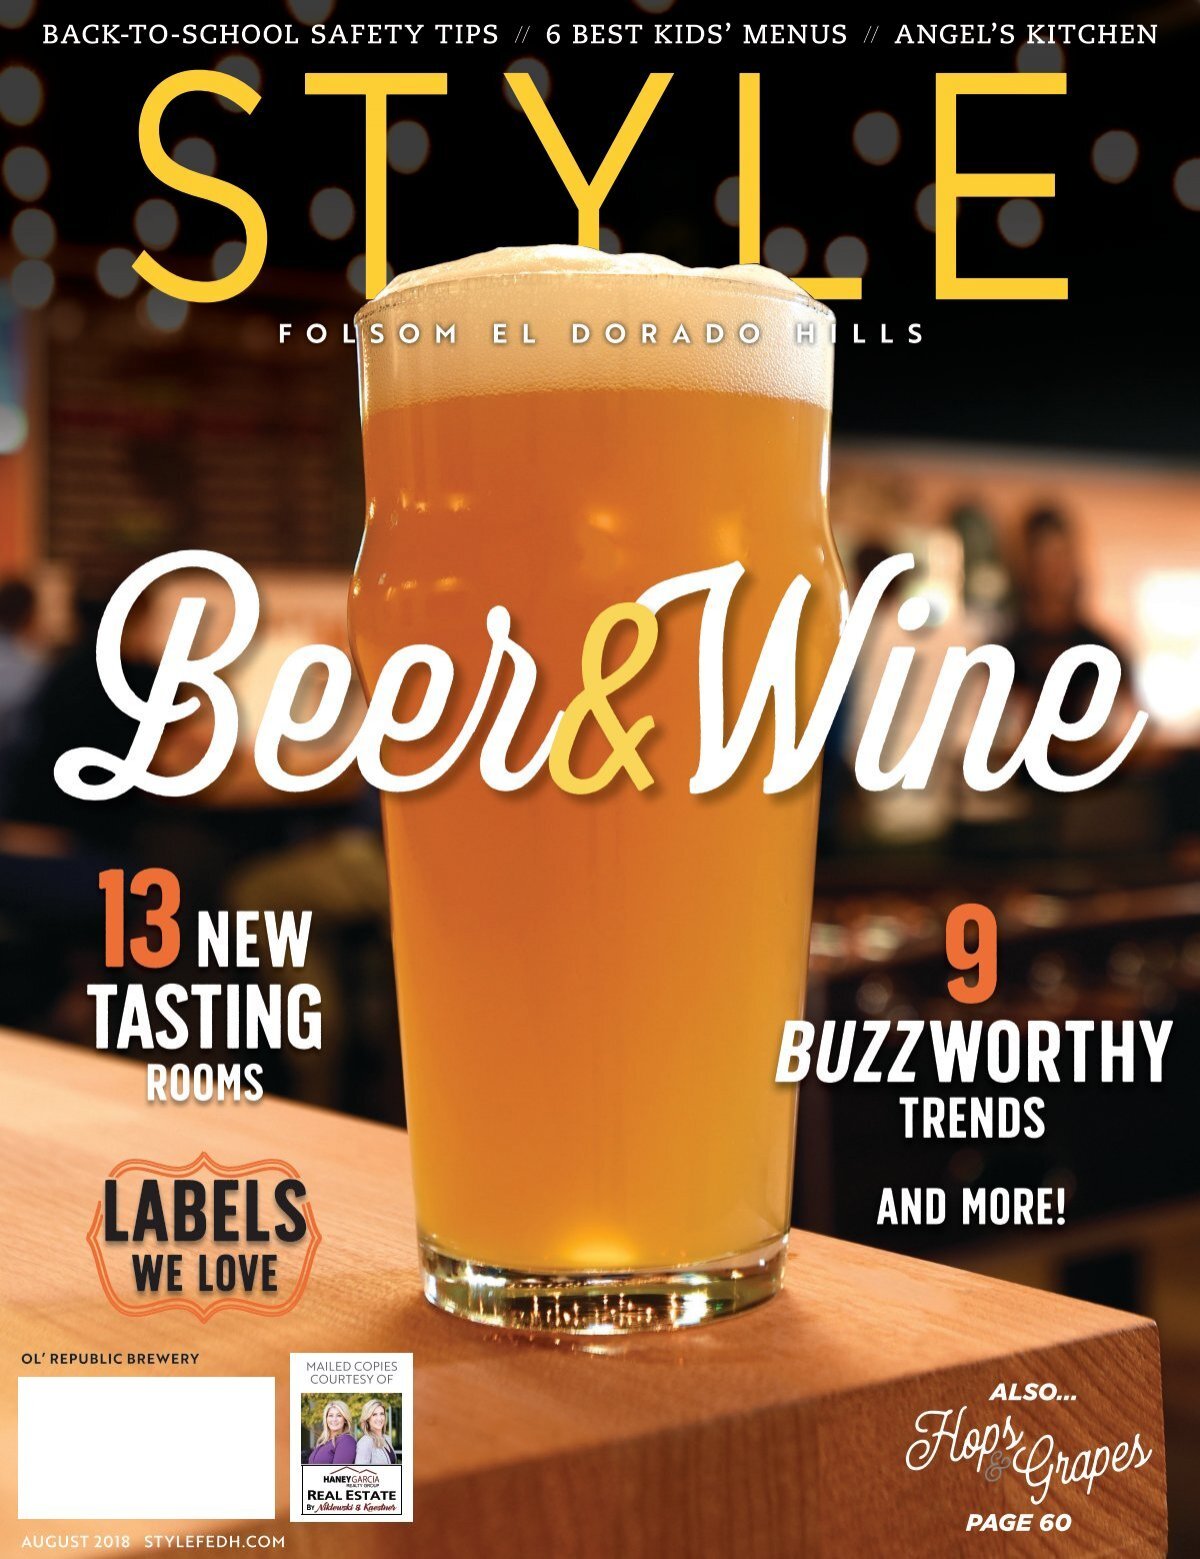 How Craft Beer Brewers Brought Bottle Recycling to Montana - YES! Magazine  Solutions Journalism